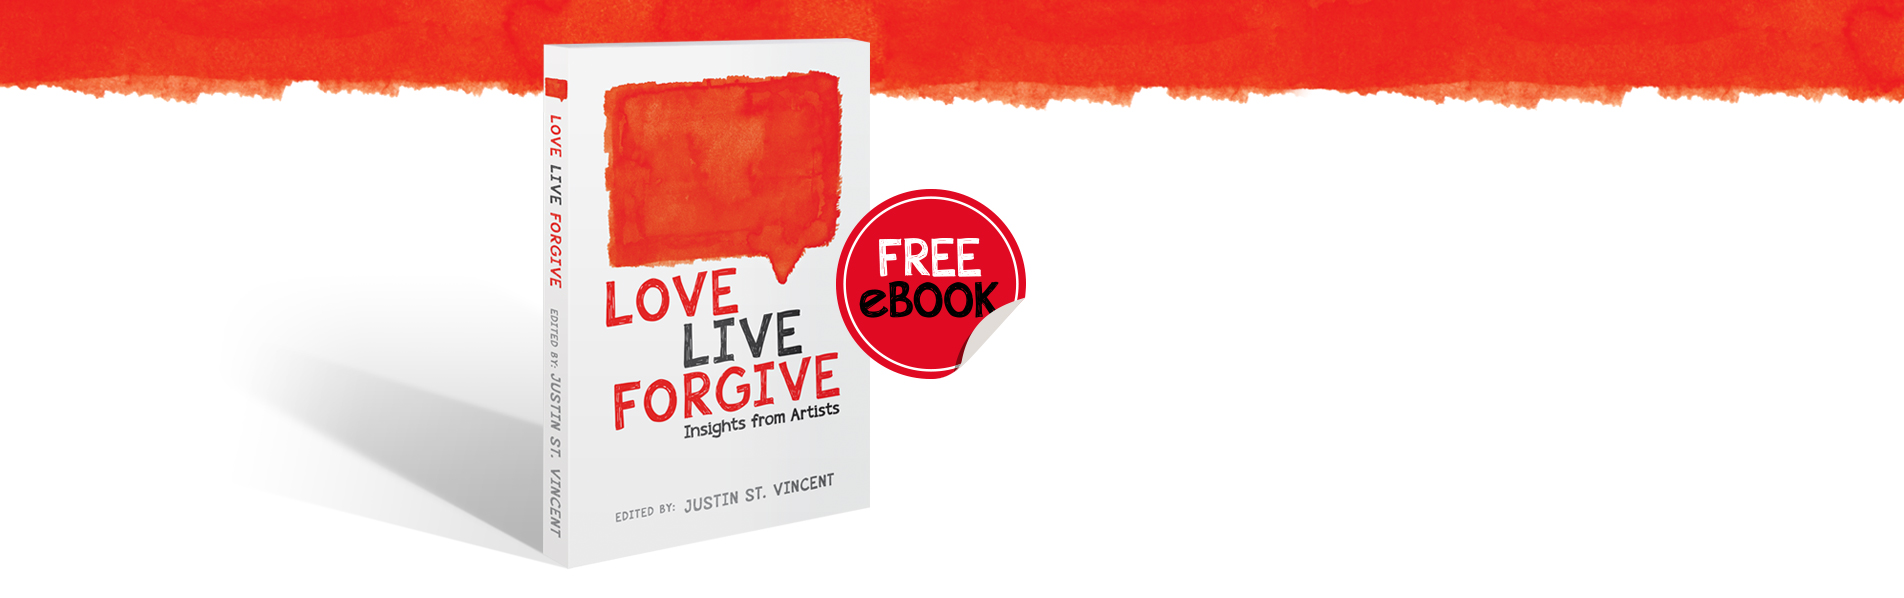 LOVE LIVE FORGIVE: Now Available for Download